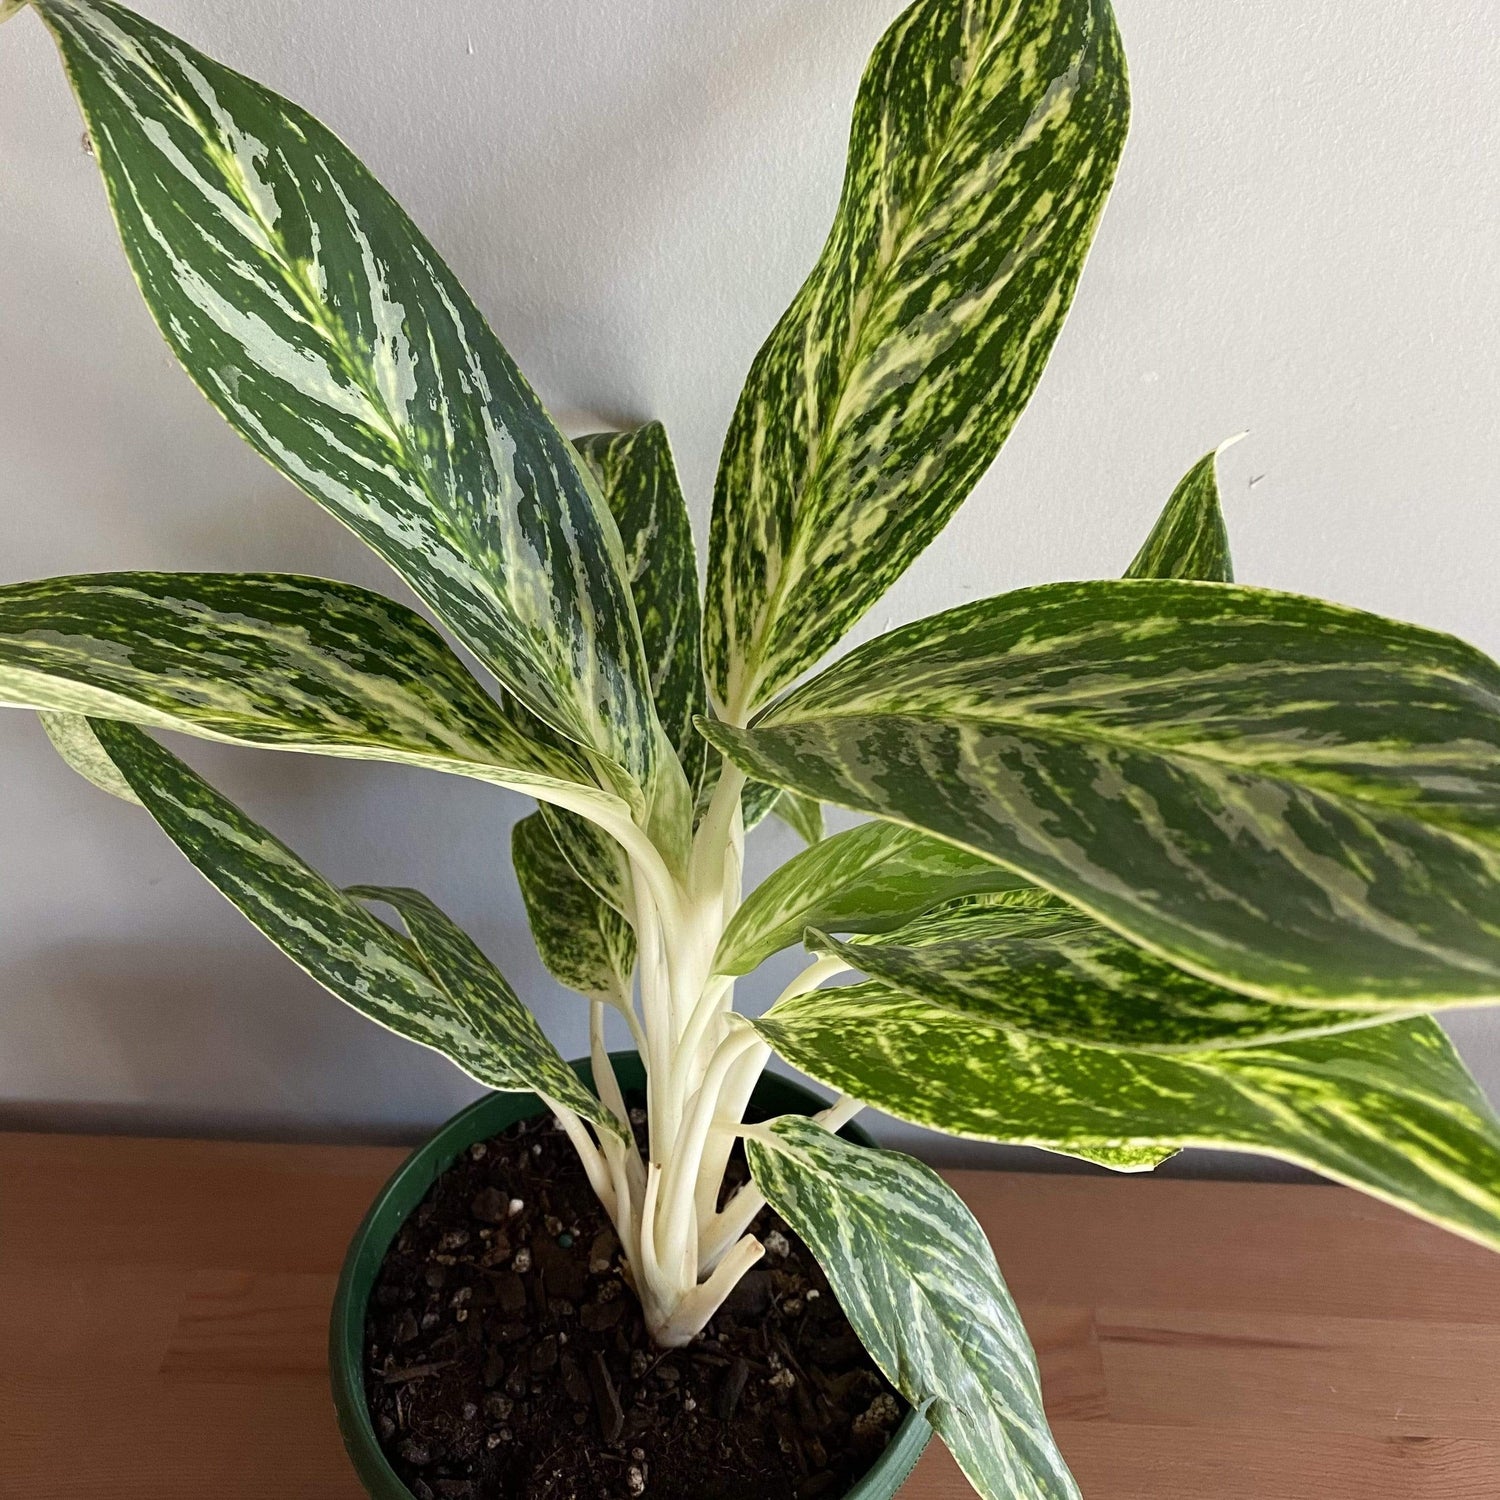 Chinese Evergreen 'Golden Madonna' - Urban Sprouts